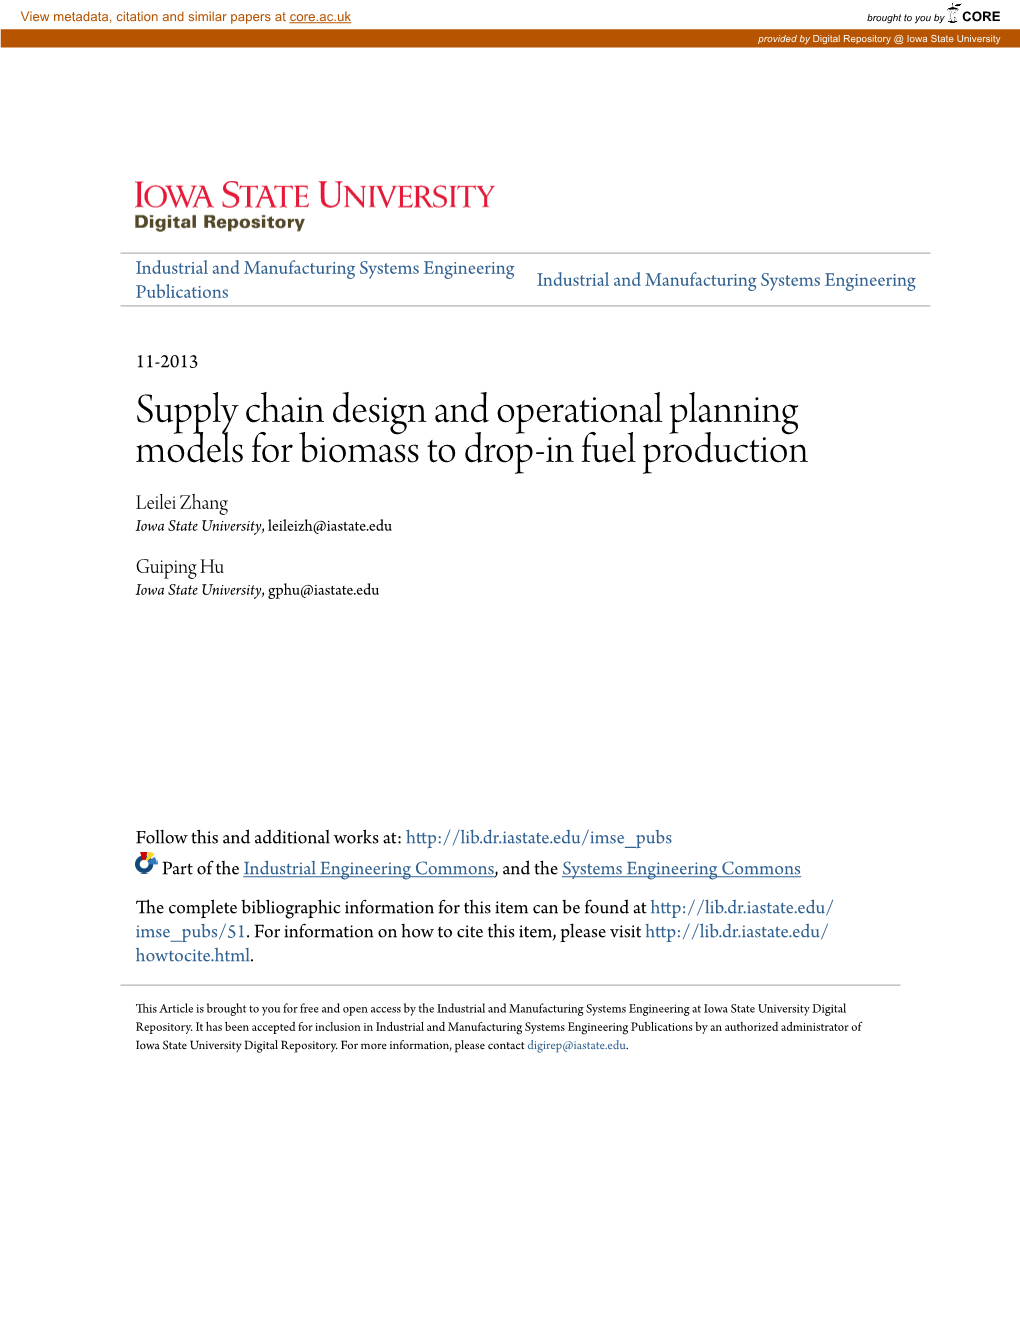 Supply Chain Design and Operational Planning Models for Biomass to Drop-In Fuel Production Leilei Zhang Iowa State University, Leileizh@Iastate.Edu